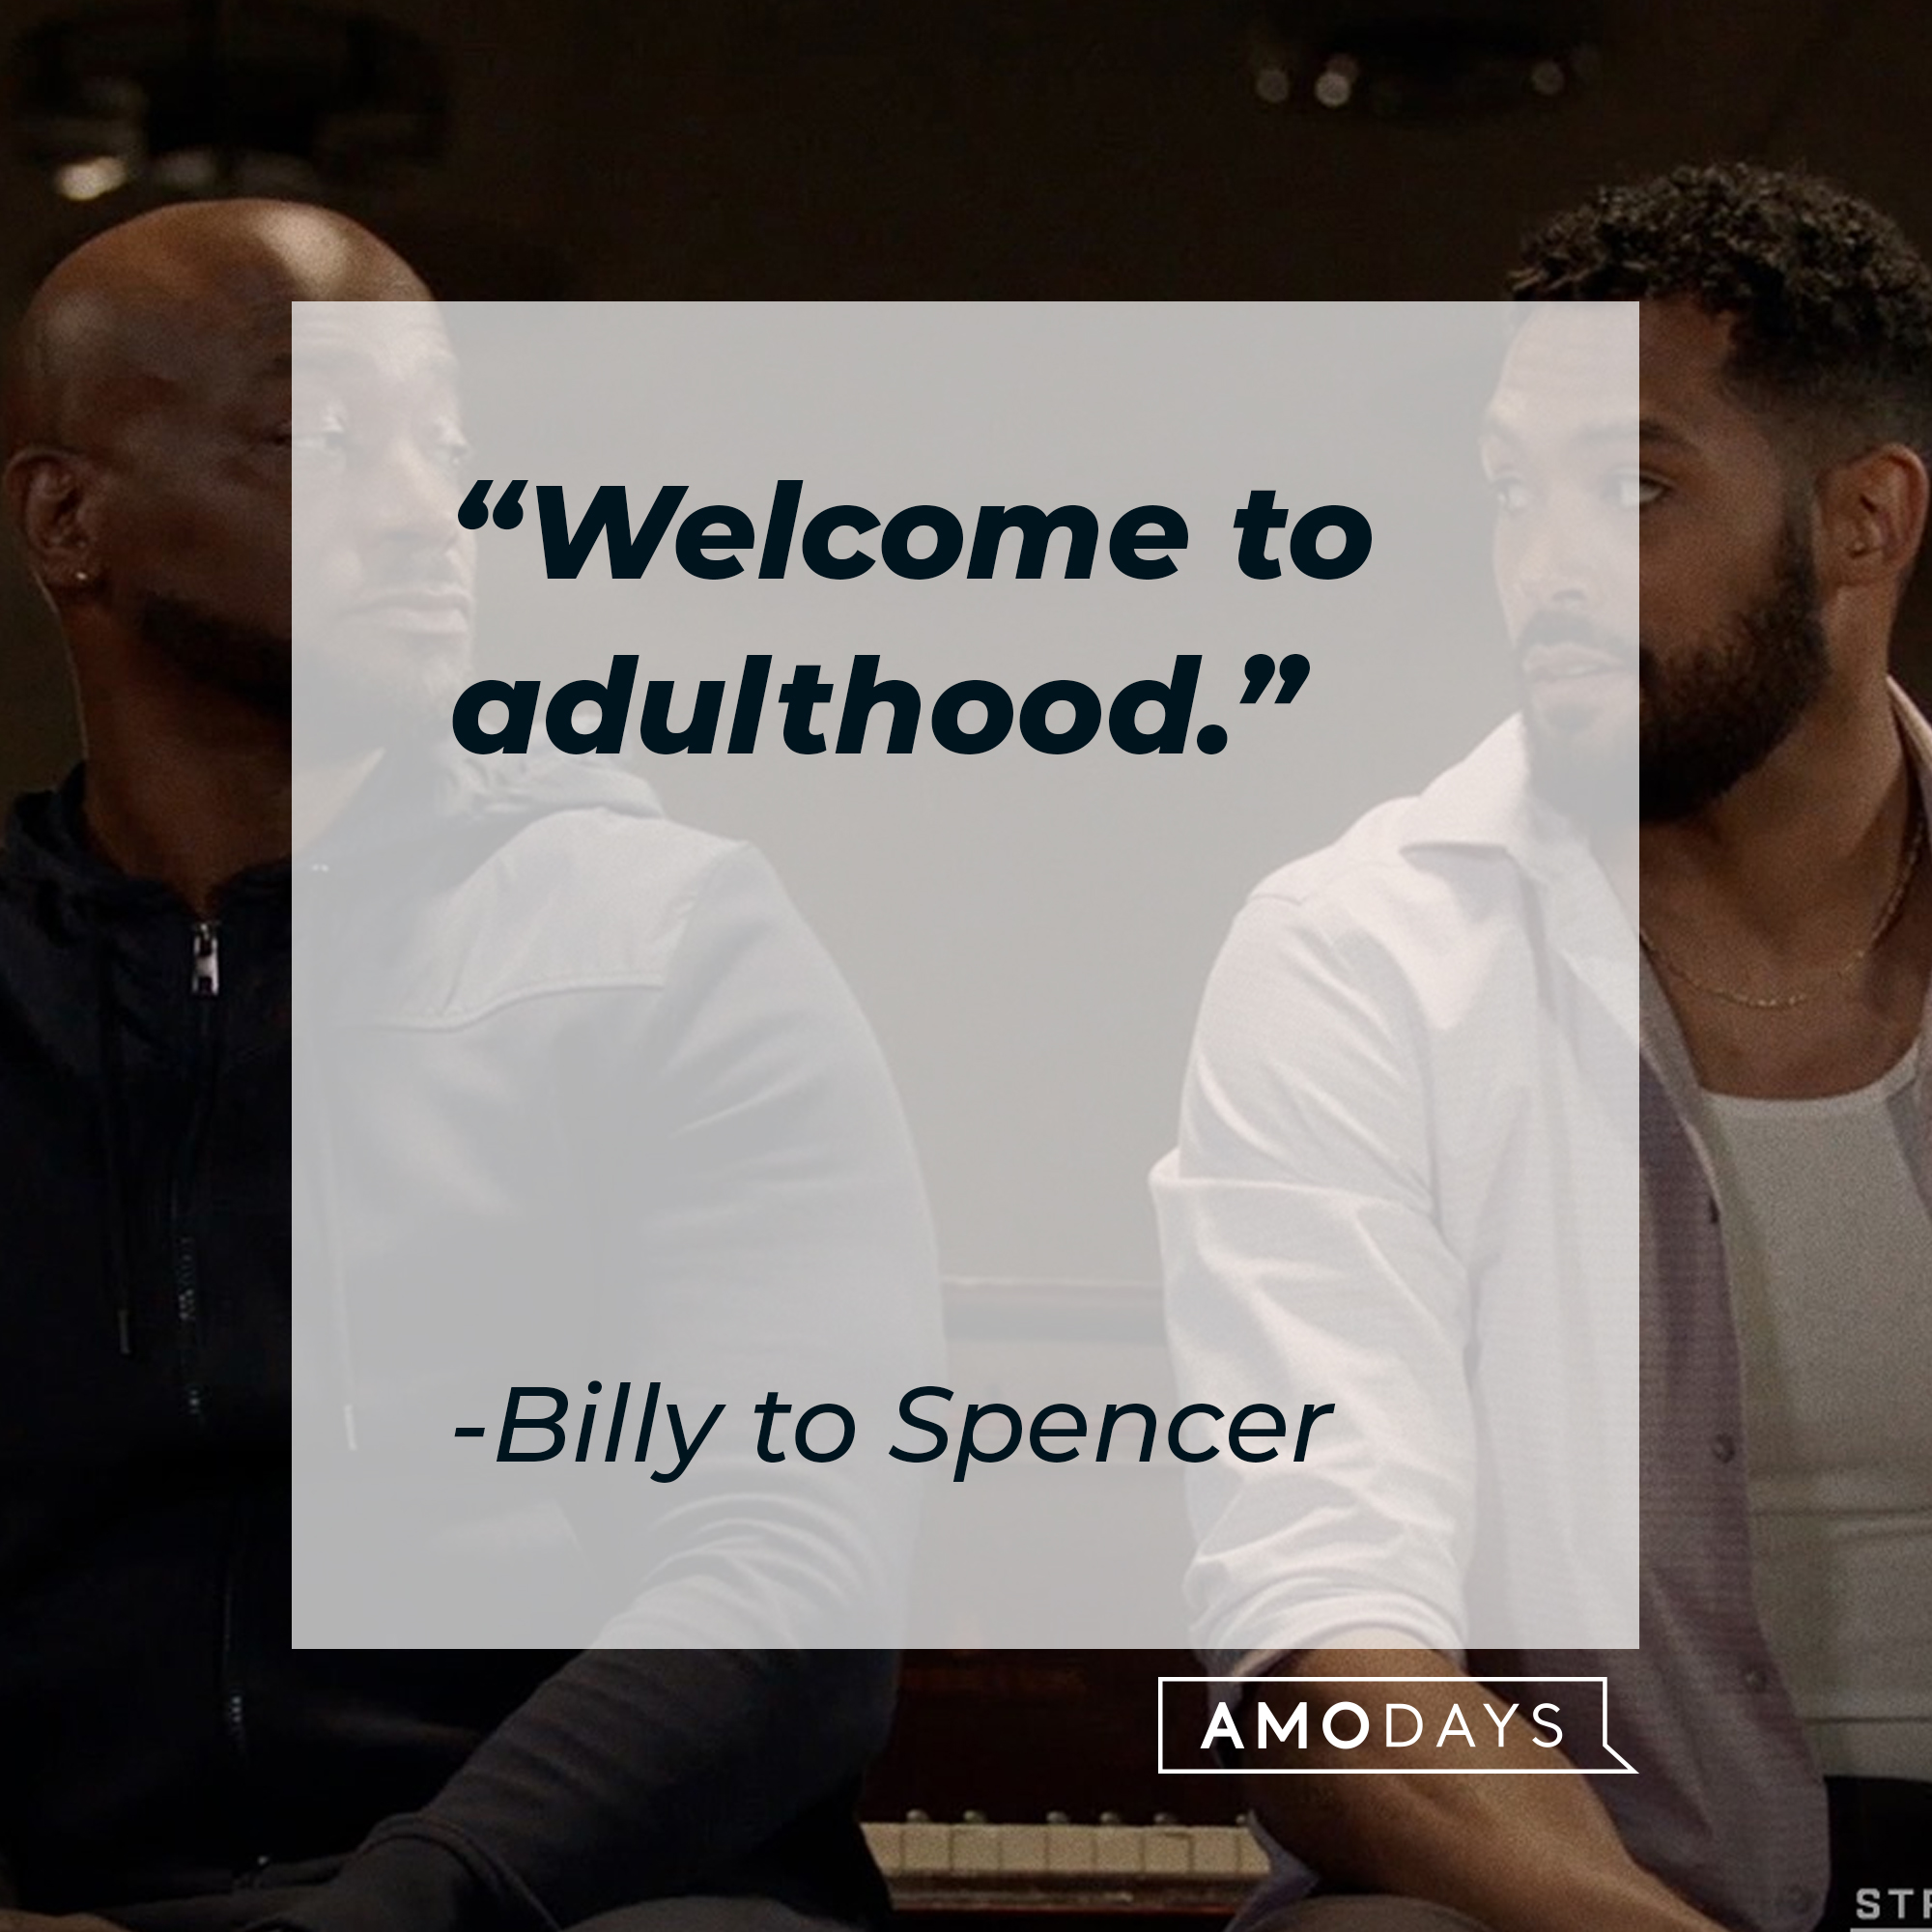 A quote from Billy to Spencer: "Welcome to adulthood." | Source: facebook.com/CWAllAmerican